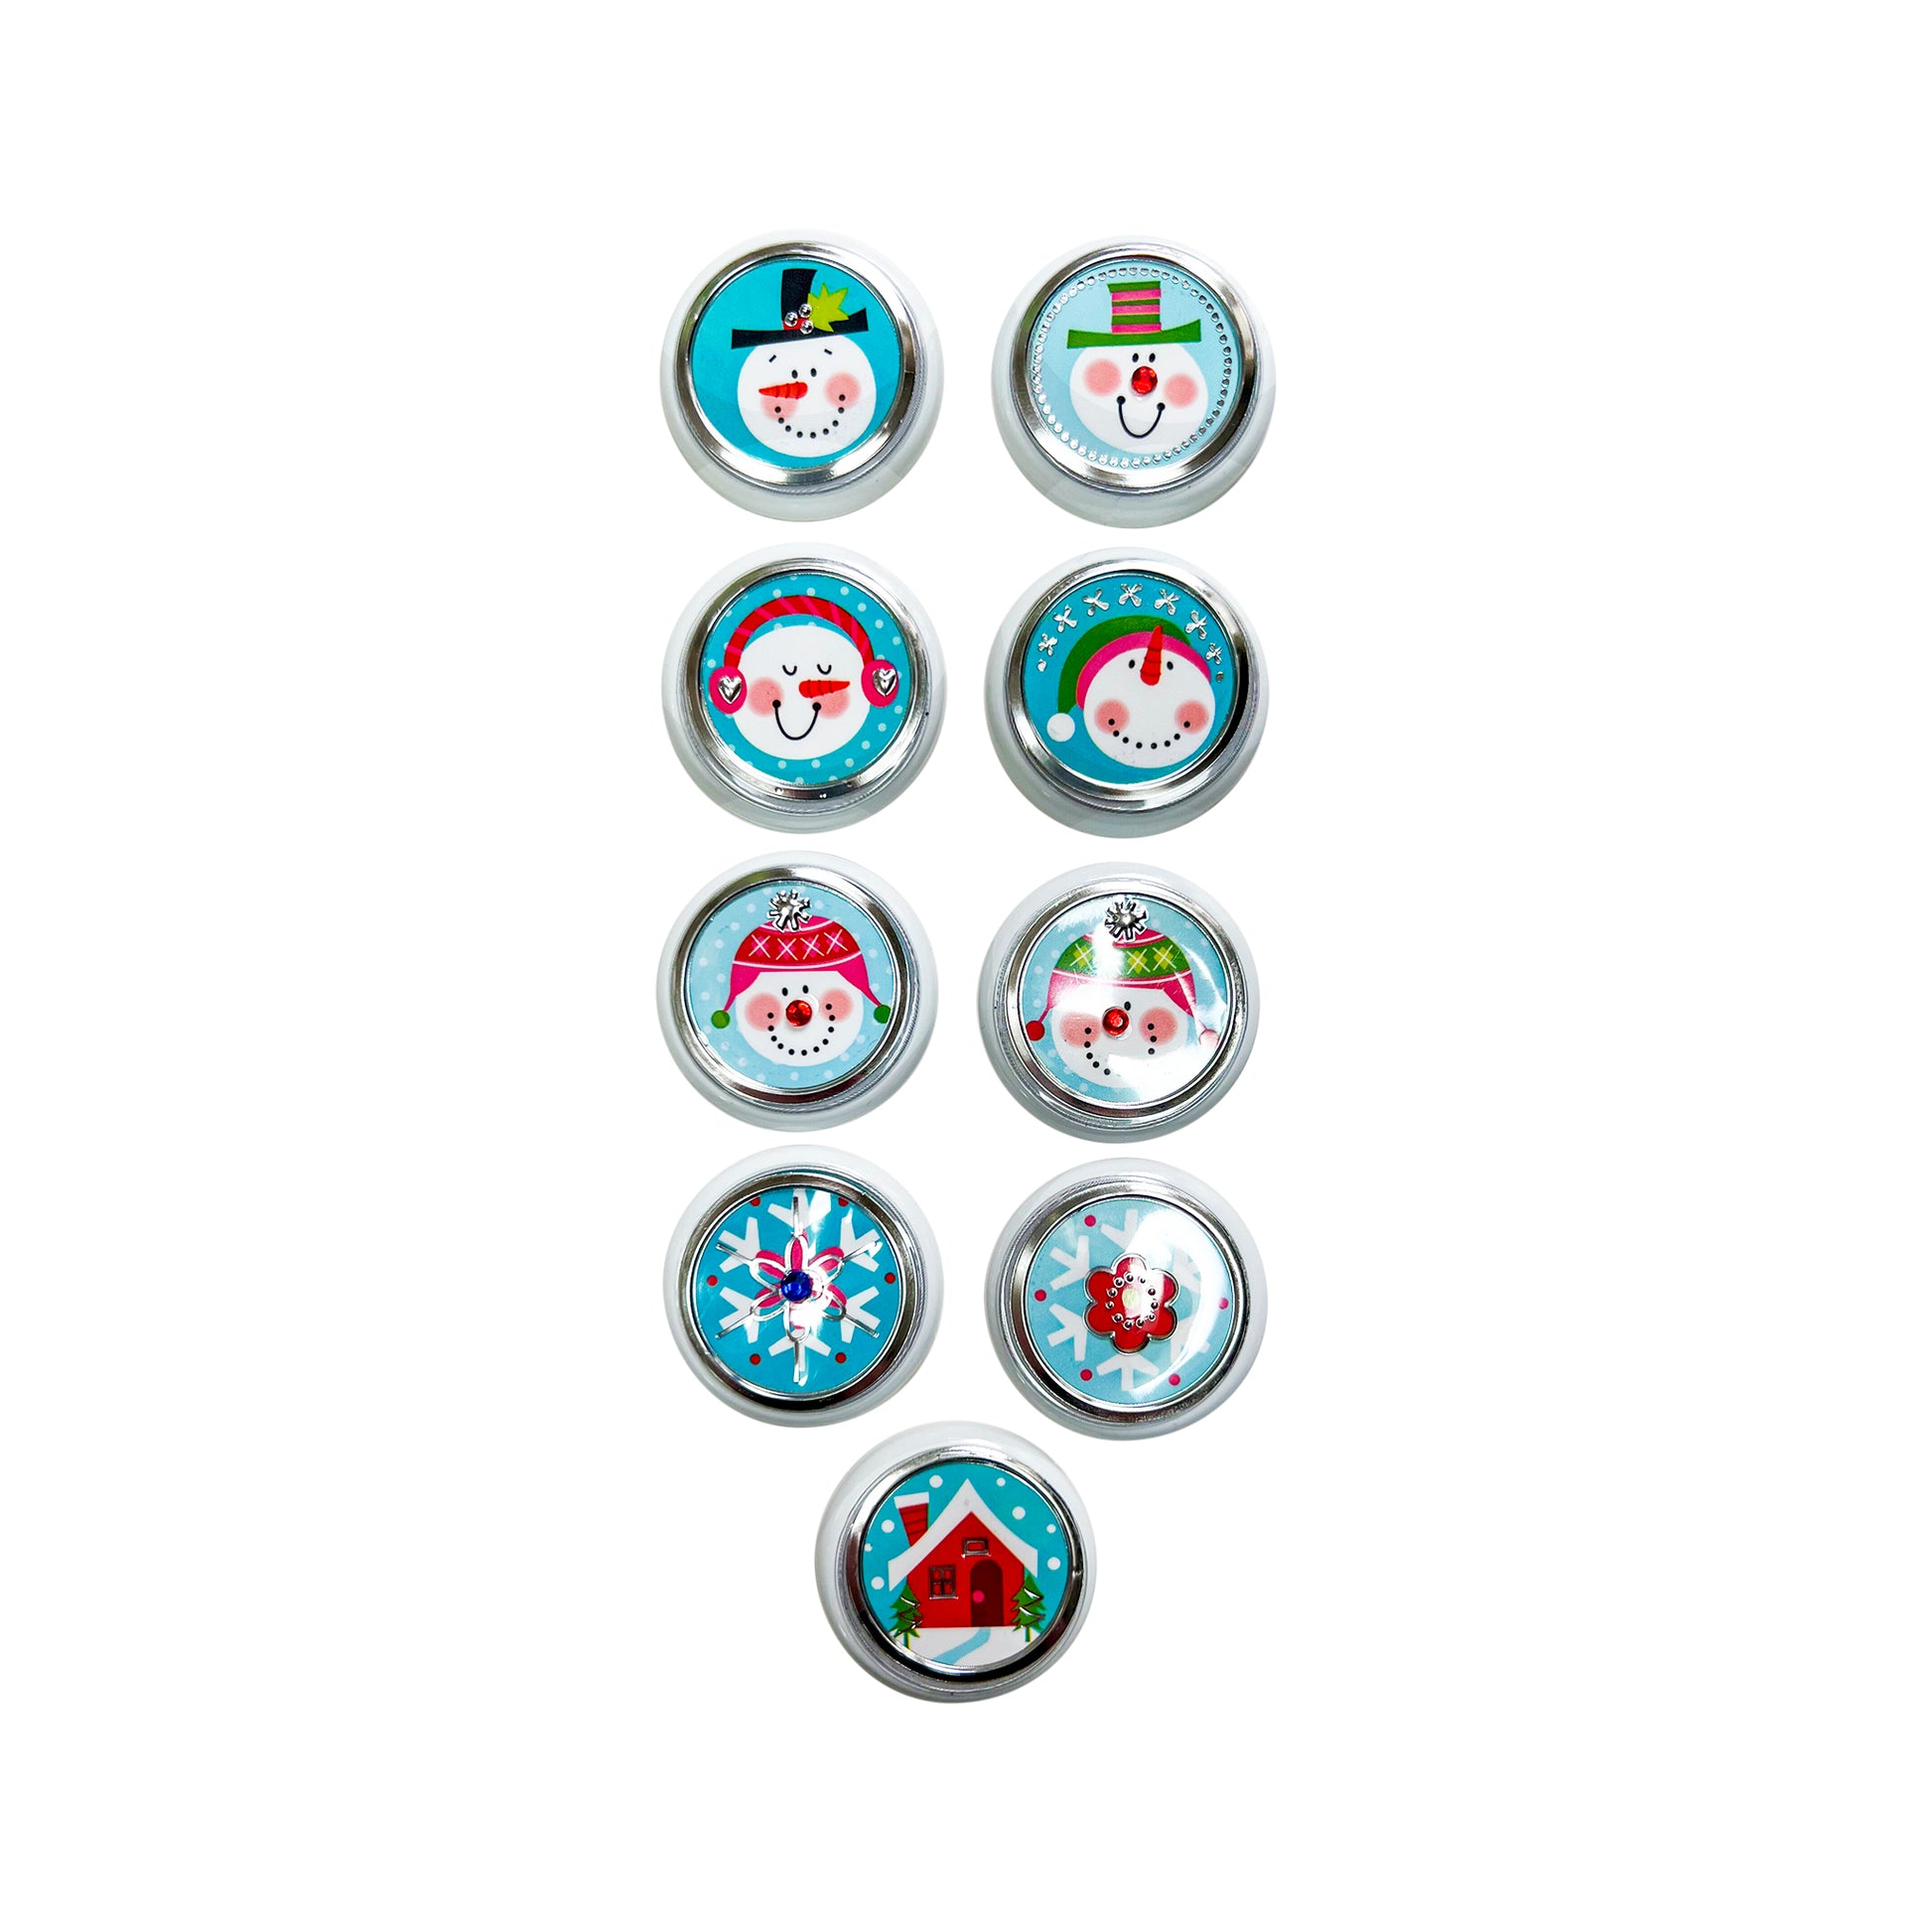 Glass Wrappings' set of snow-themed aqua stickers on white buttons.